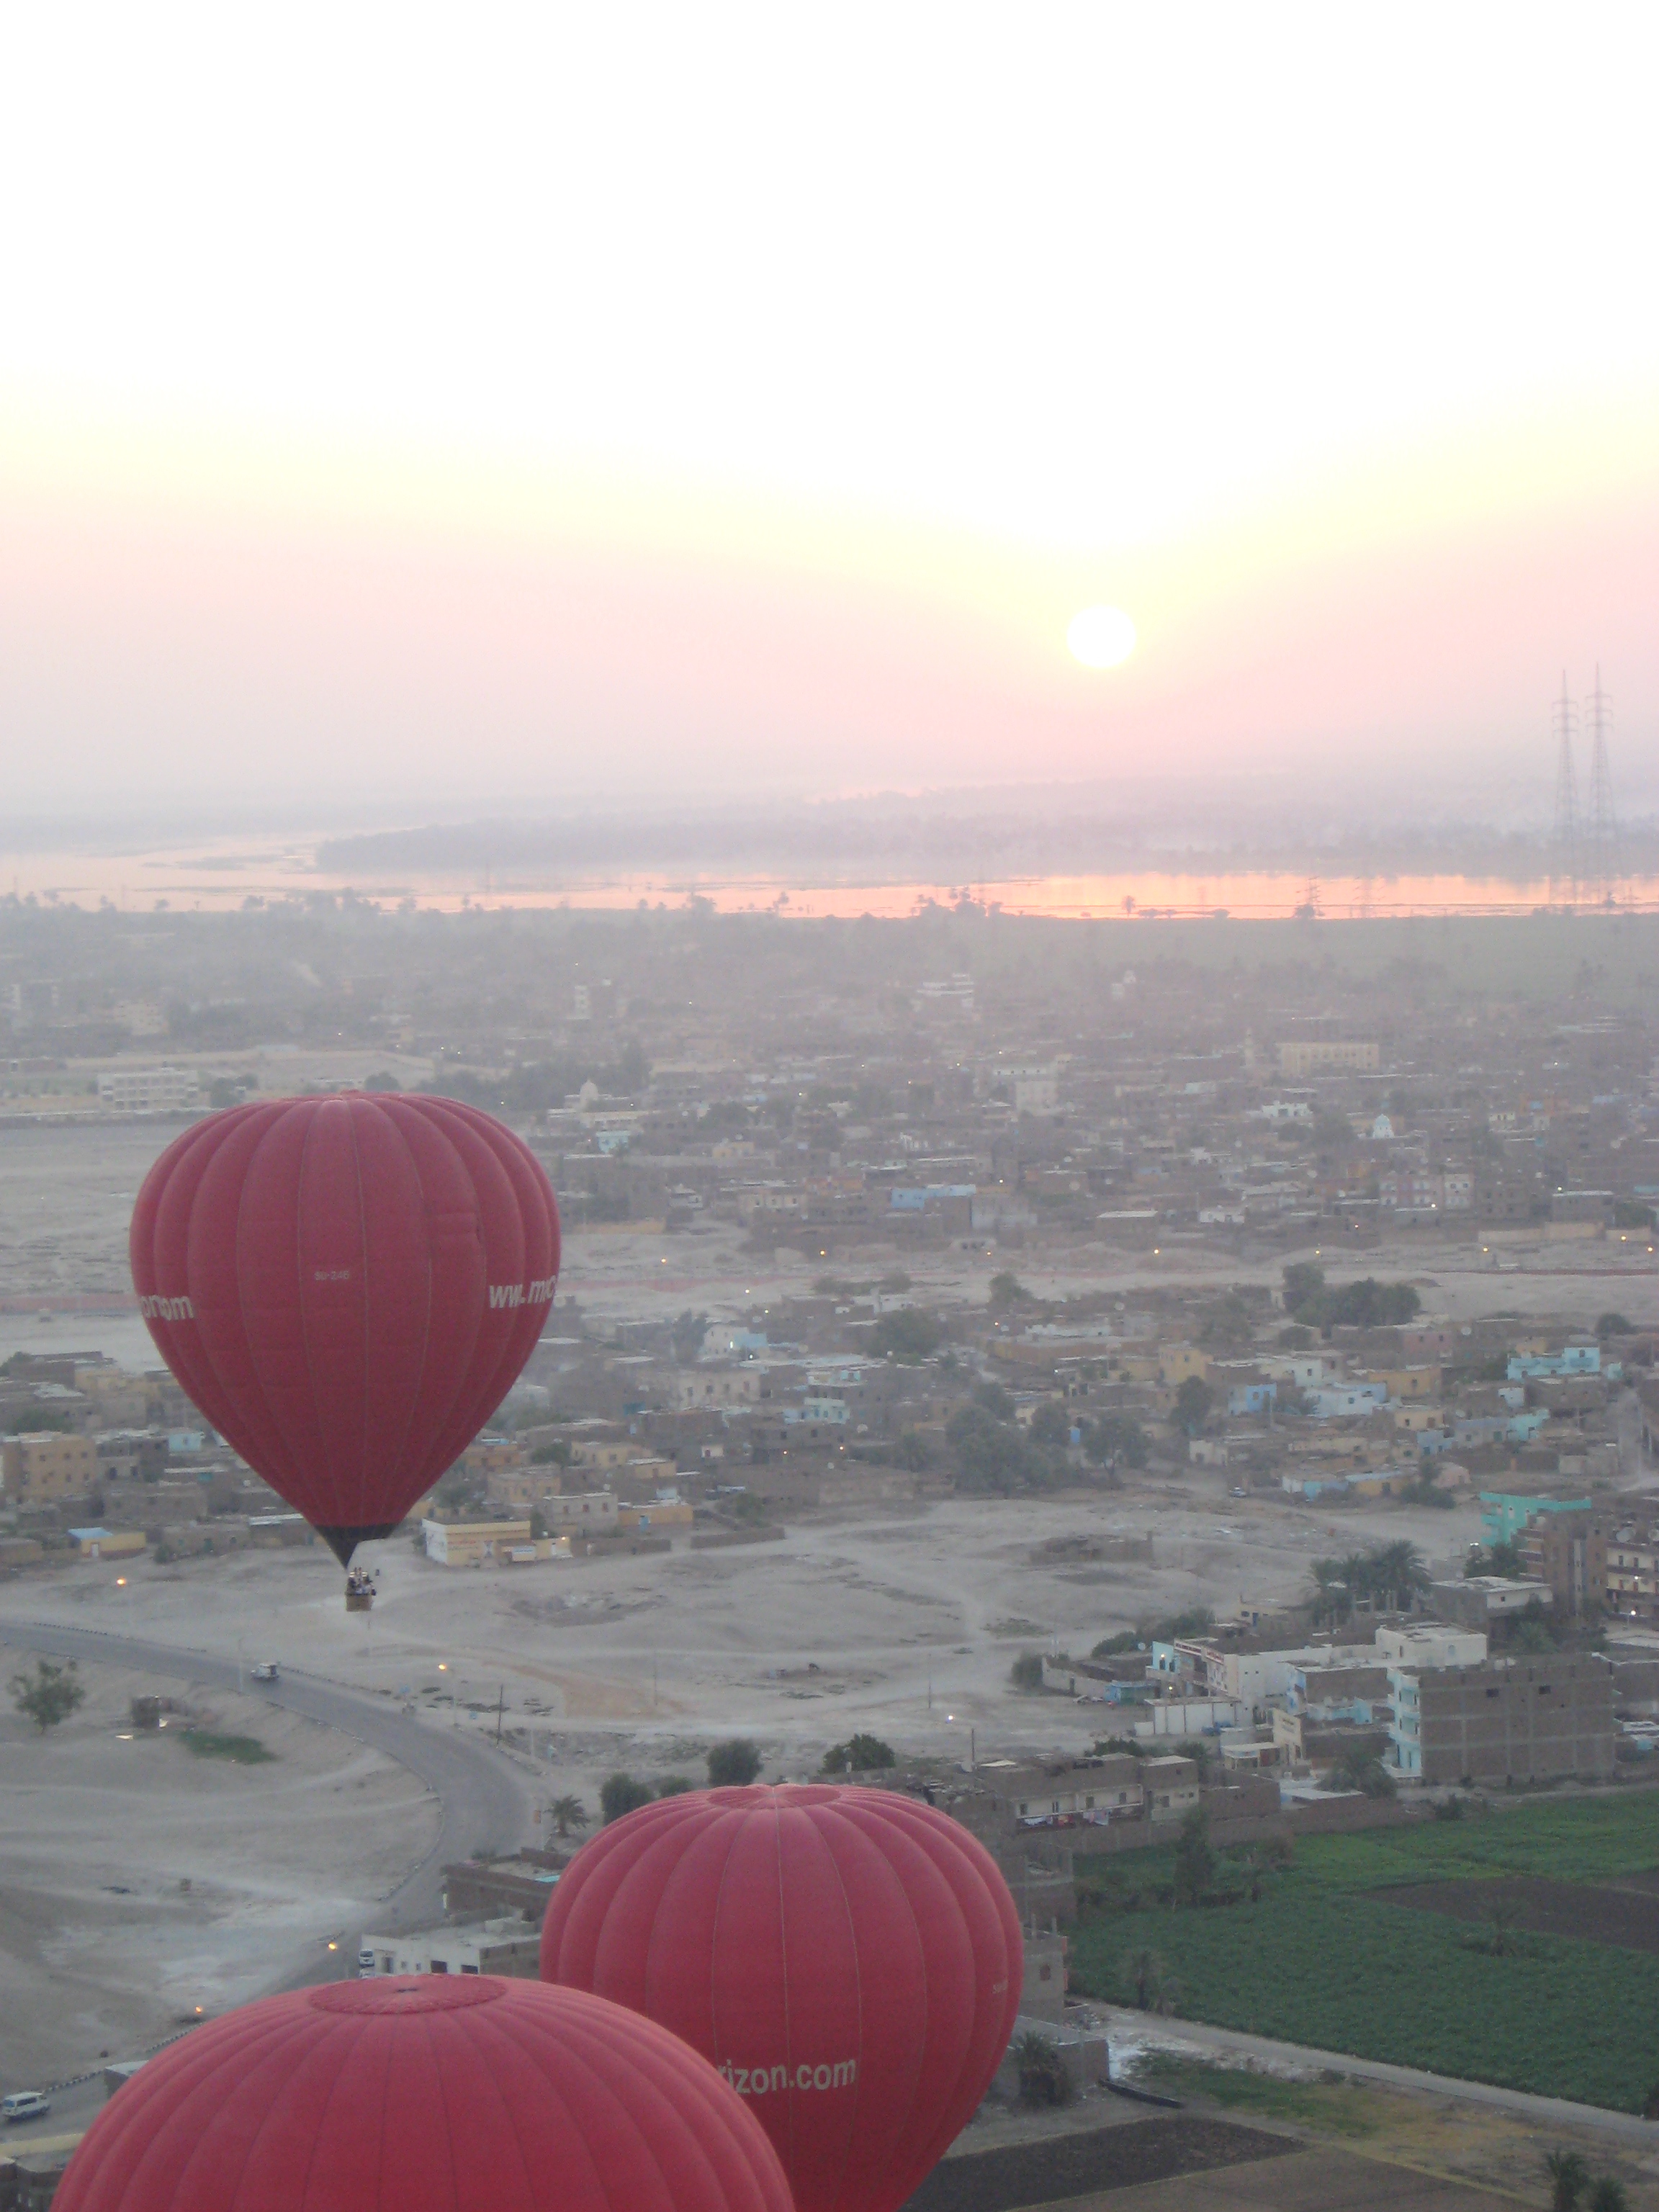 Valley of the Kings (Hot Air Balloon) - 7/7/07